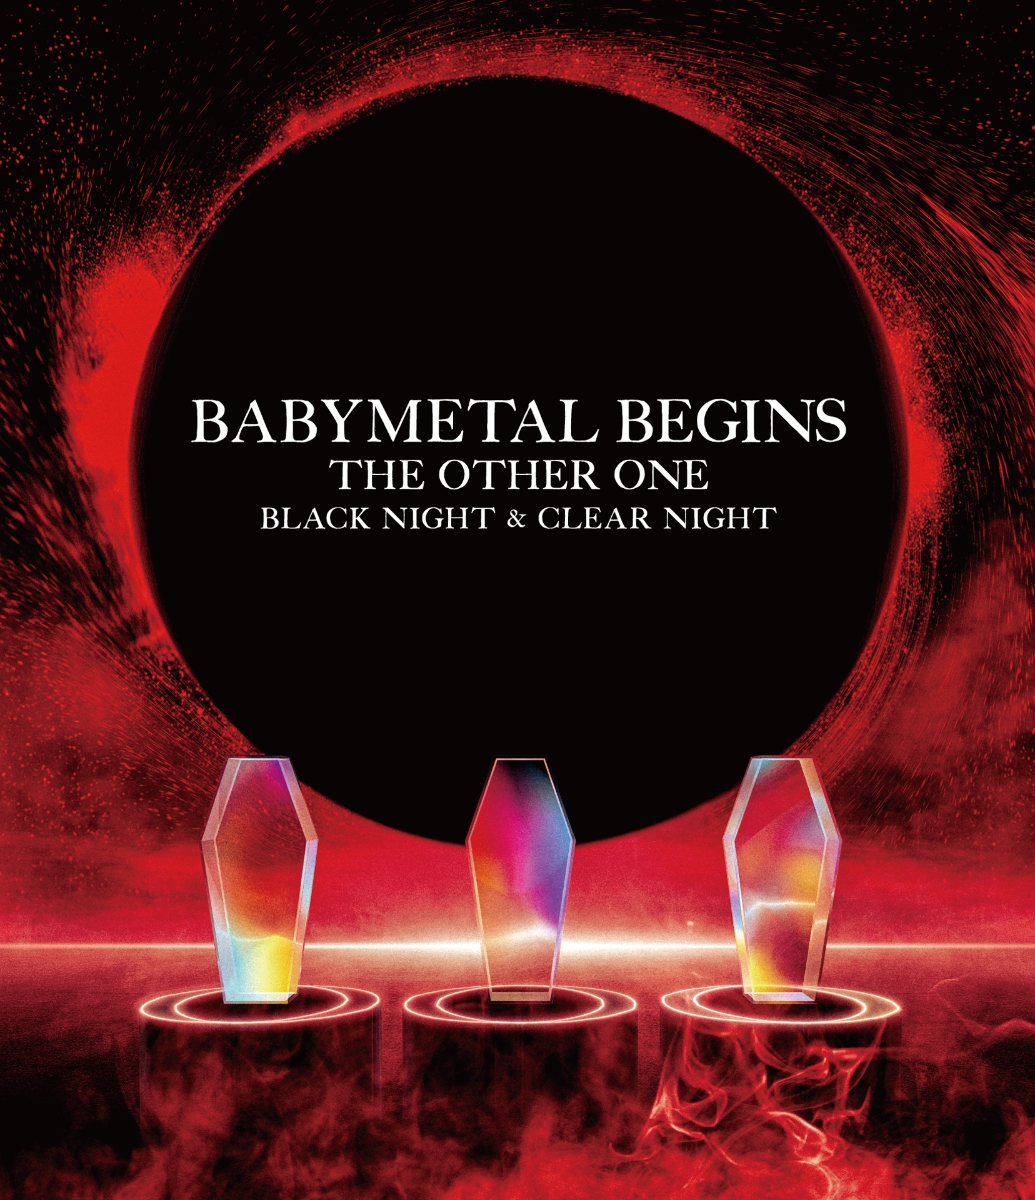 BABYMETAL BEGINS - THE OTHER ONE -(通常盤 2Blu-ray)【Blu-ray】